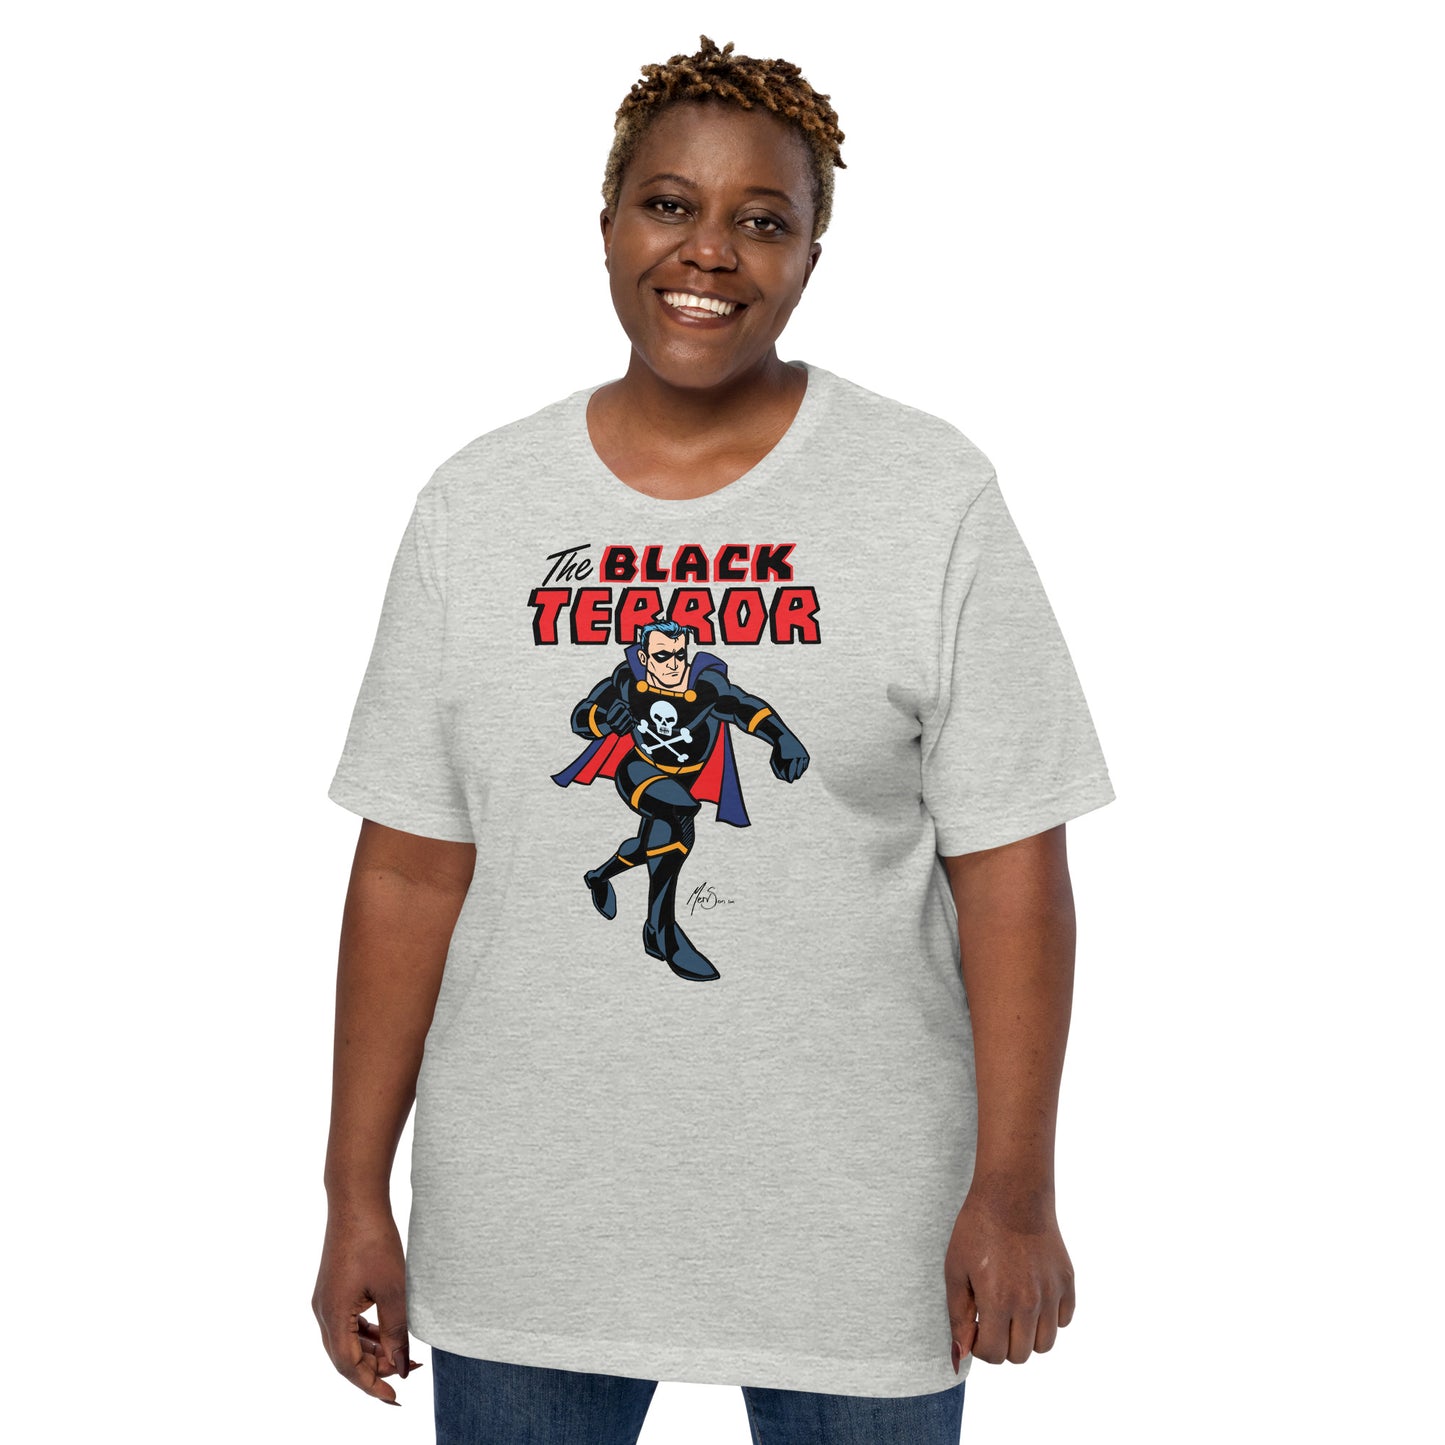 Black Terror: Champion for Justice Tee